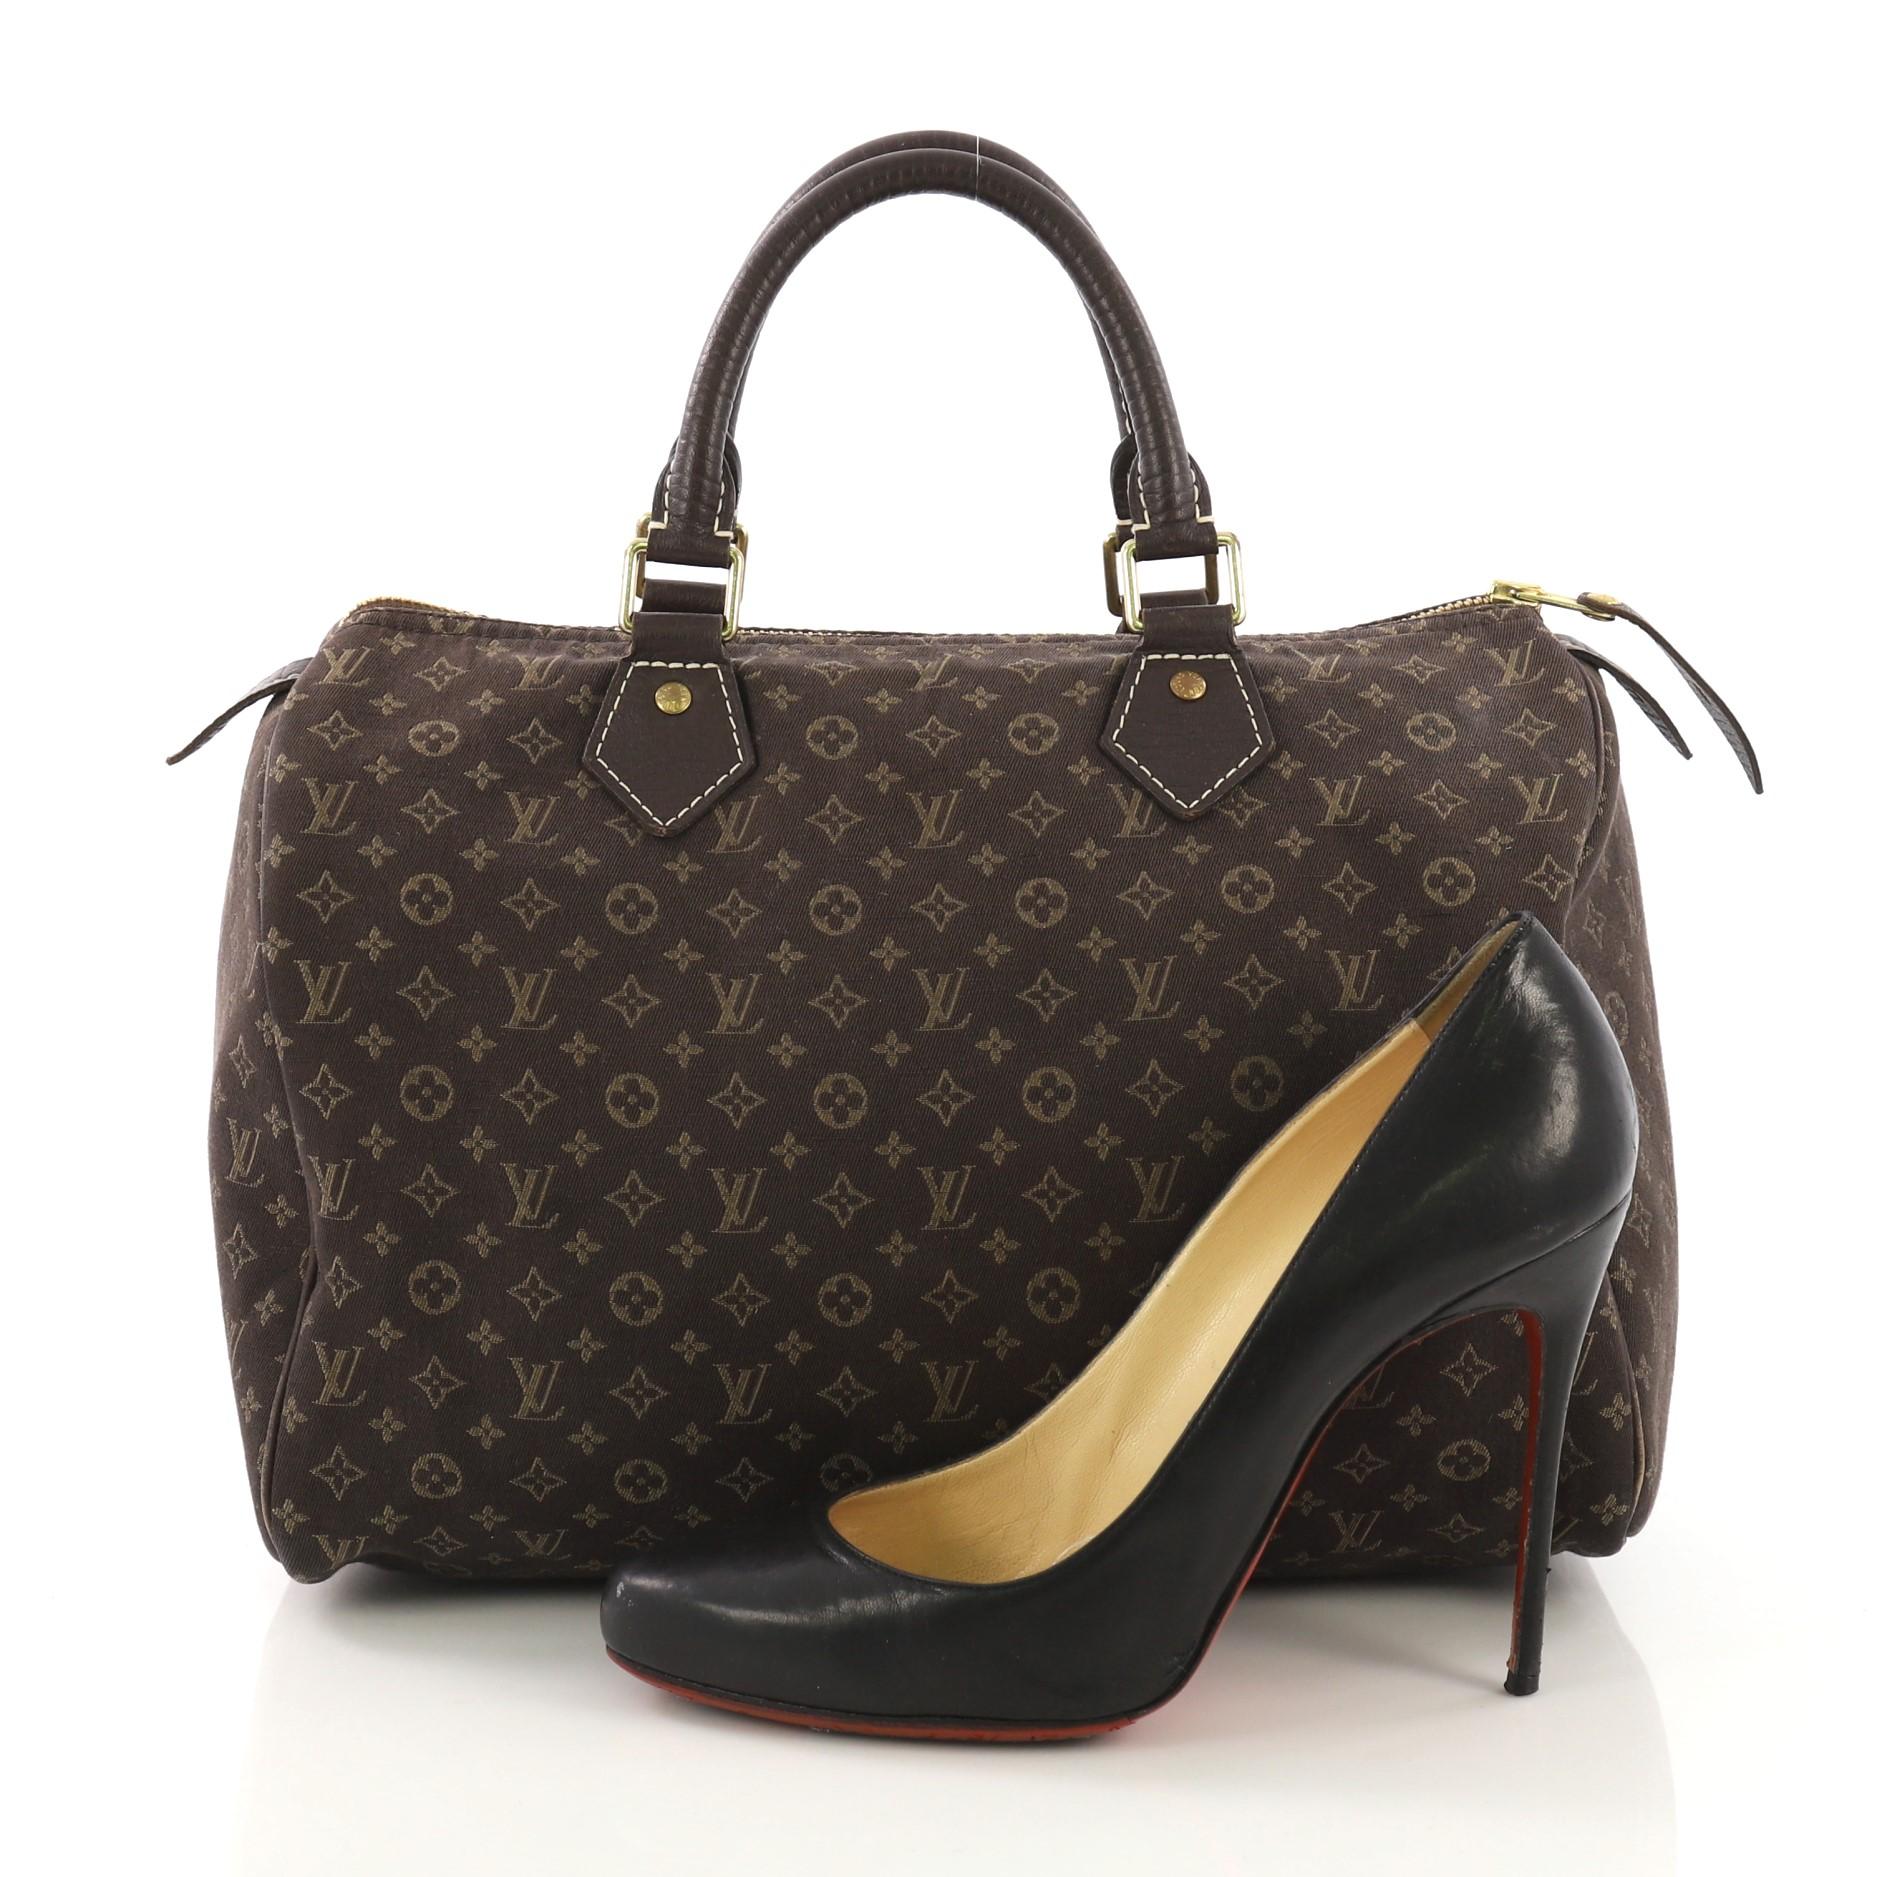 This Louis Vuitton Speedy Handbag Mini Lin 30, crafted from brown monogram mini lin canvas, features dark brown cowhide leather handles and trim, white contrast stitching and gold-tone hardware. Its zip closure opens to a brown fabric interior with